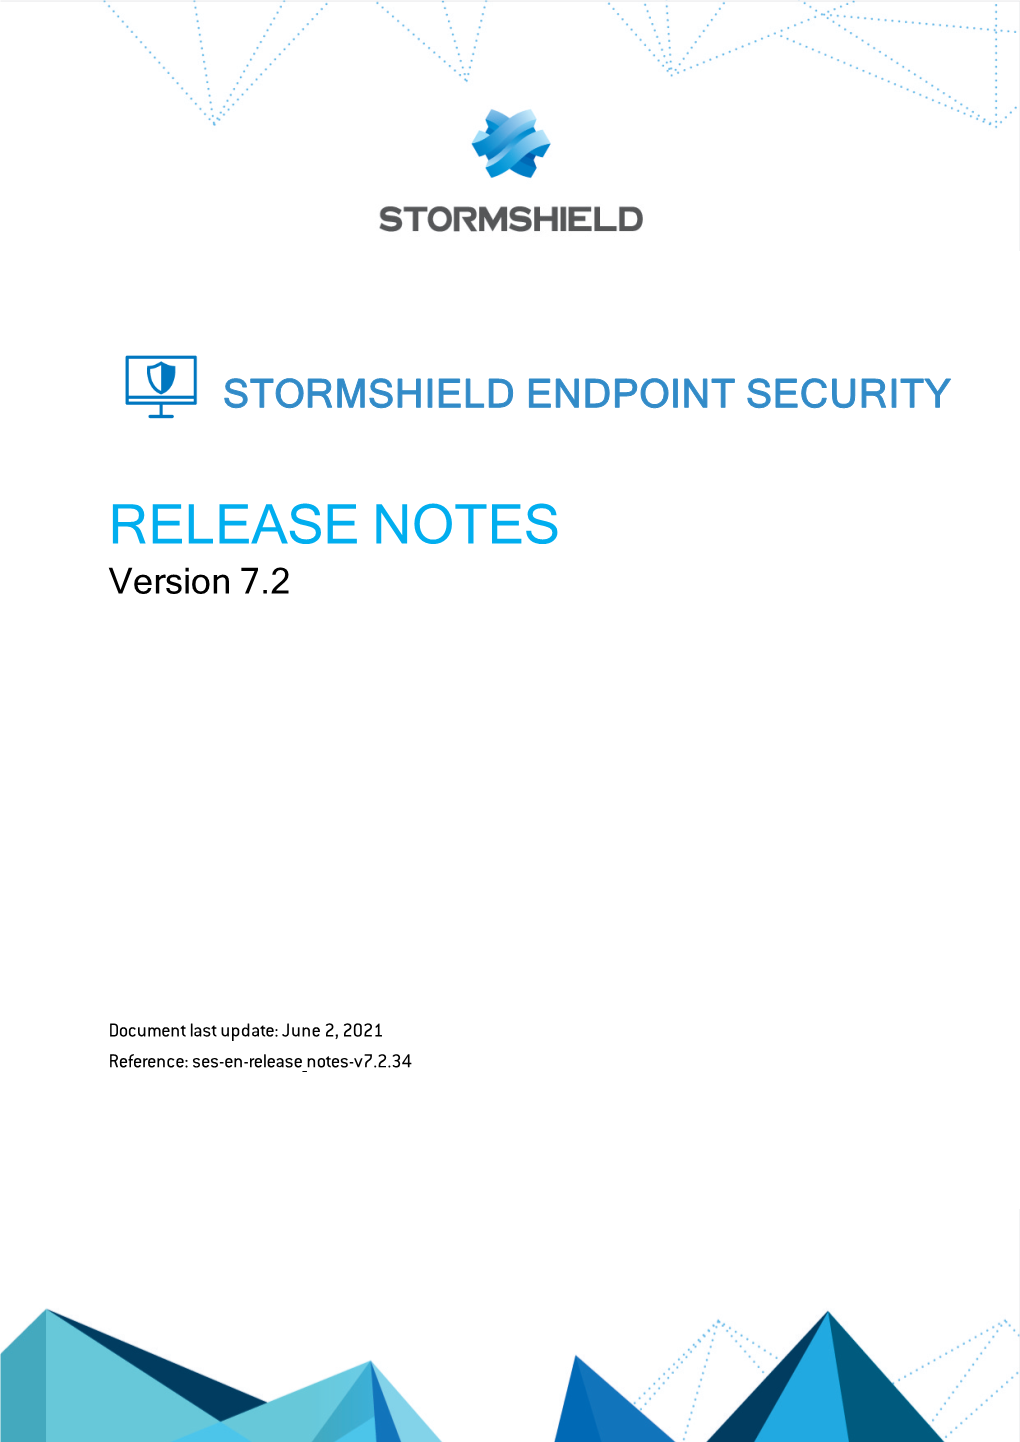 Stormshield Endpoint Security 7.2 Release Notes